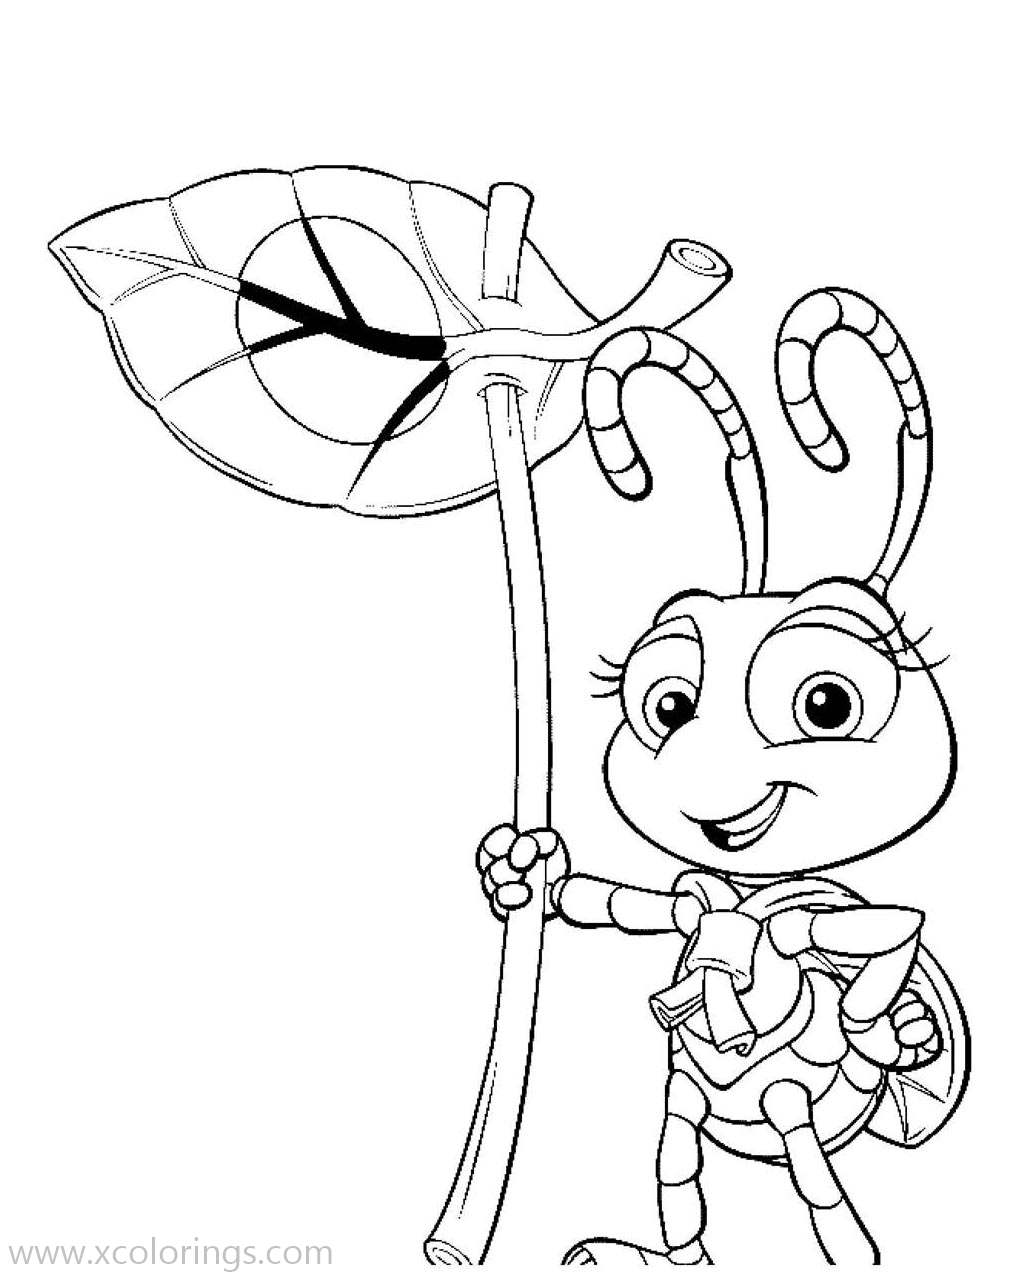 Free A Bugs Life Coloring Pages Dot with a Flag printable